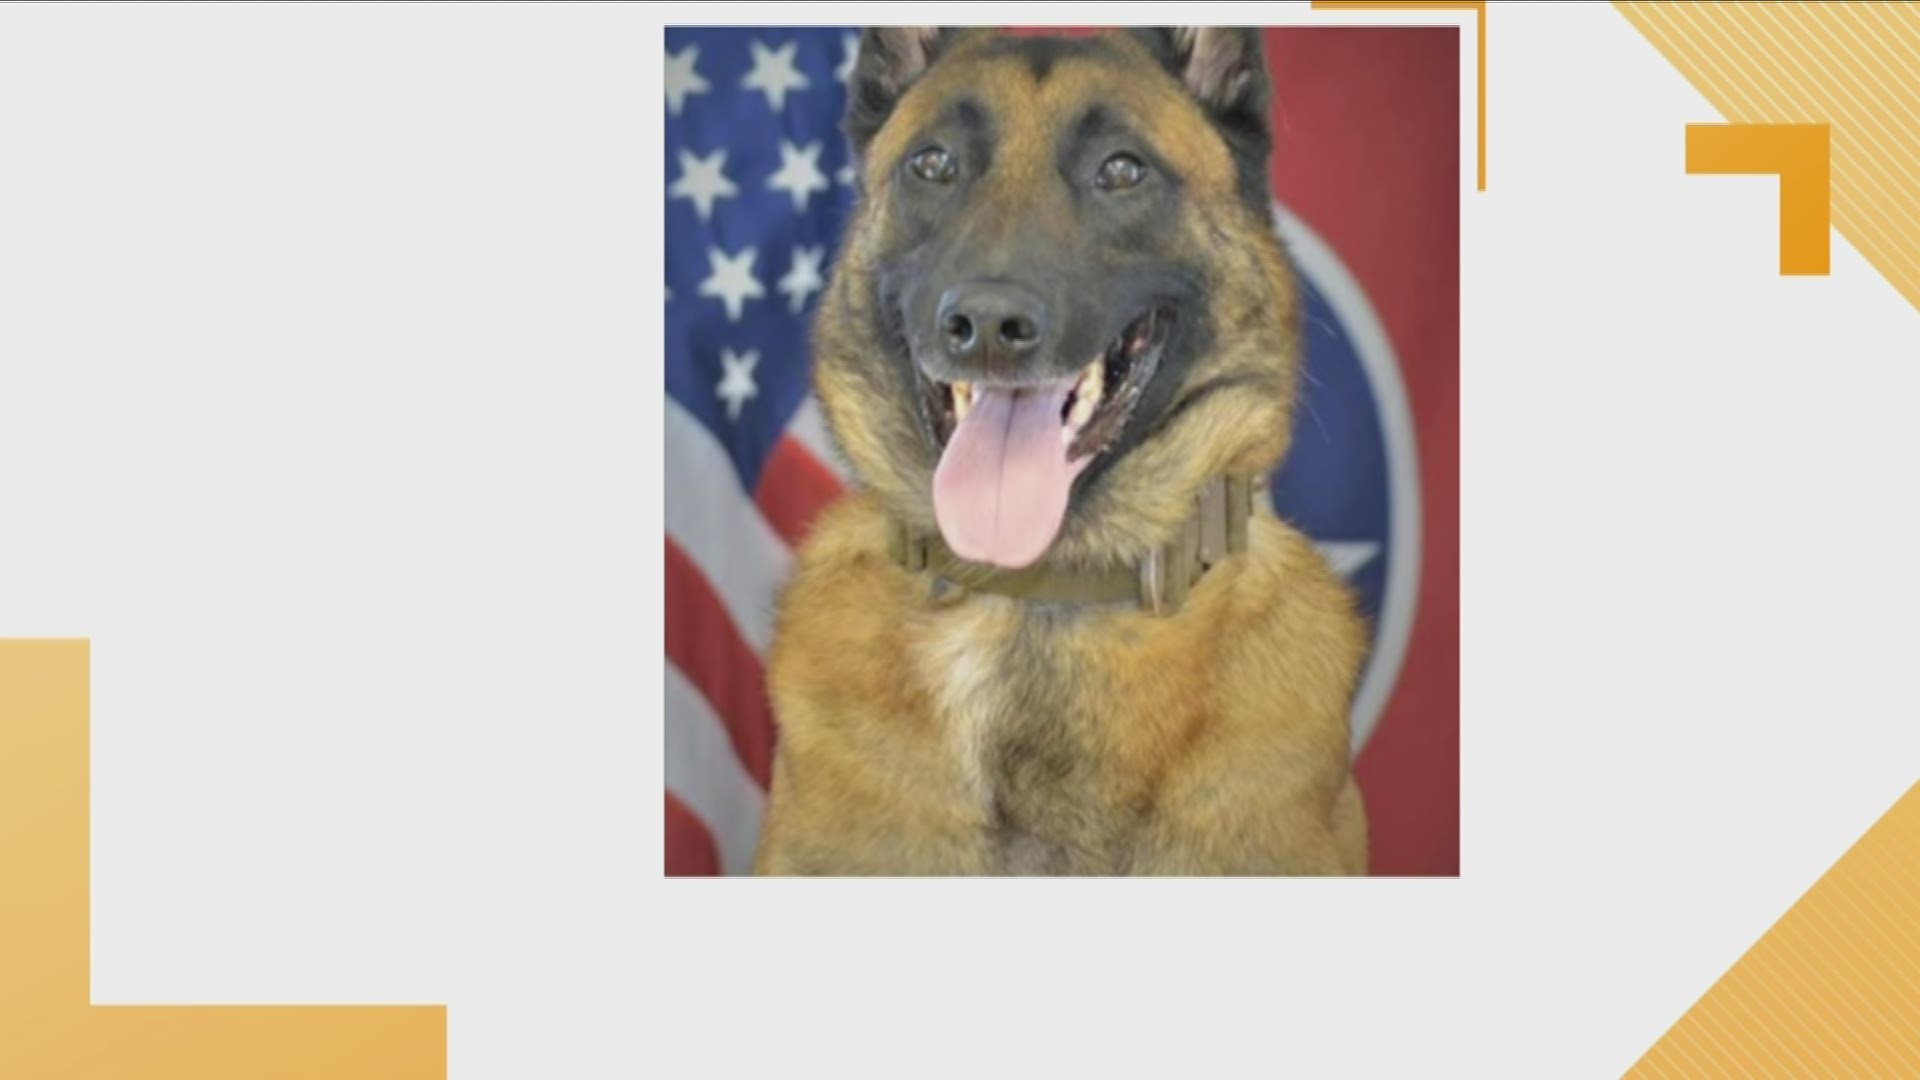 The sheriff said the K-9 passed away suddenly due to a medical condition.